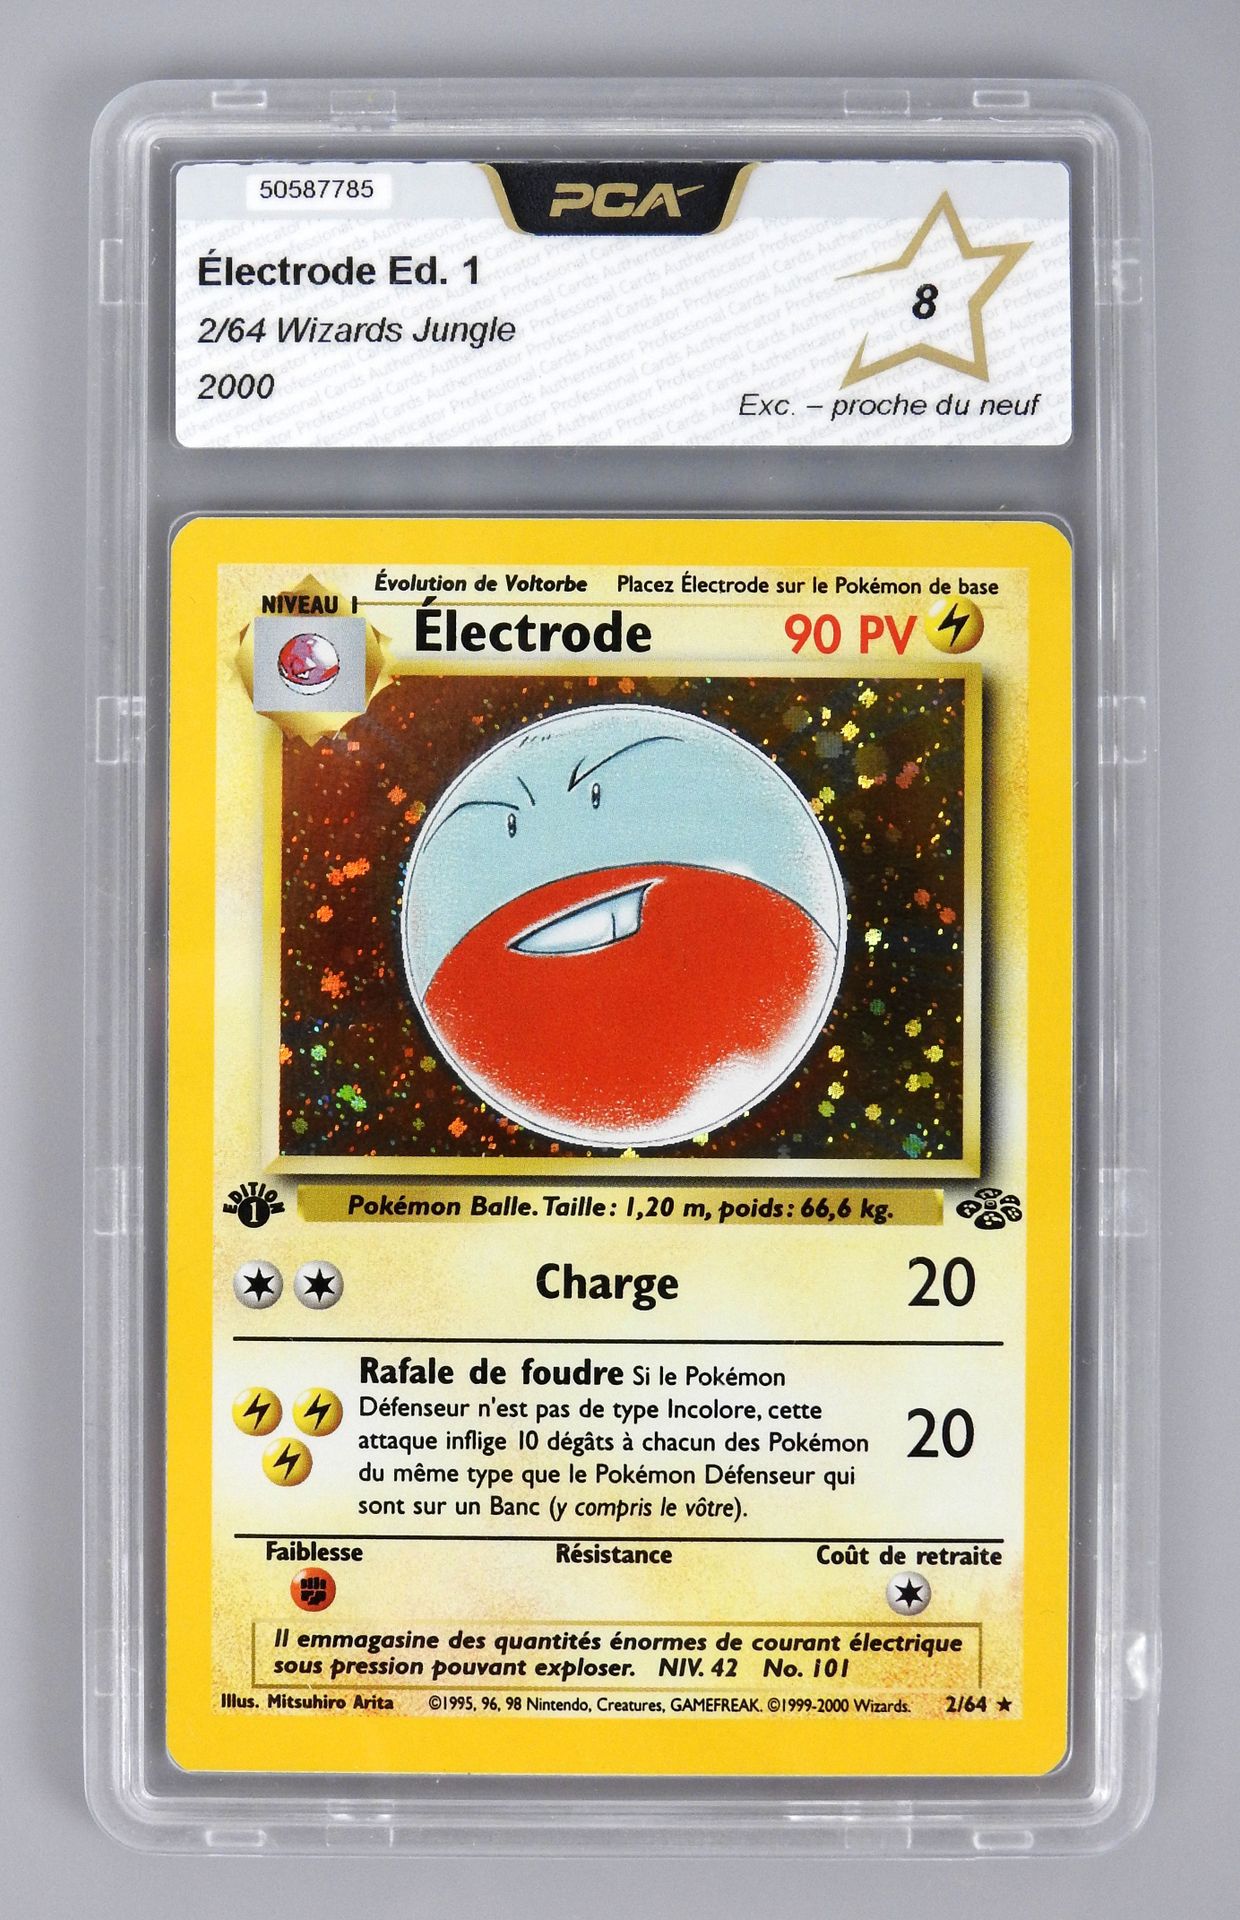 Null ELECTRODE Ed 1

Wizards Jungle Block 2/64

Pokémon card rated PCA 8/10